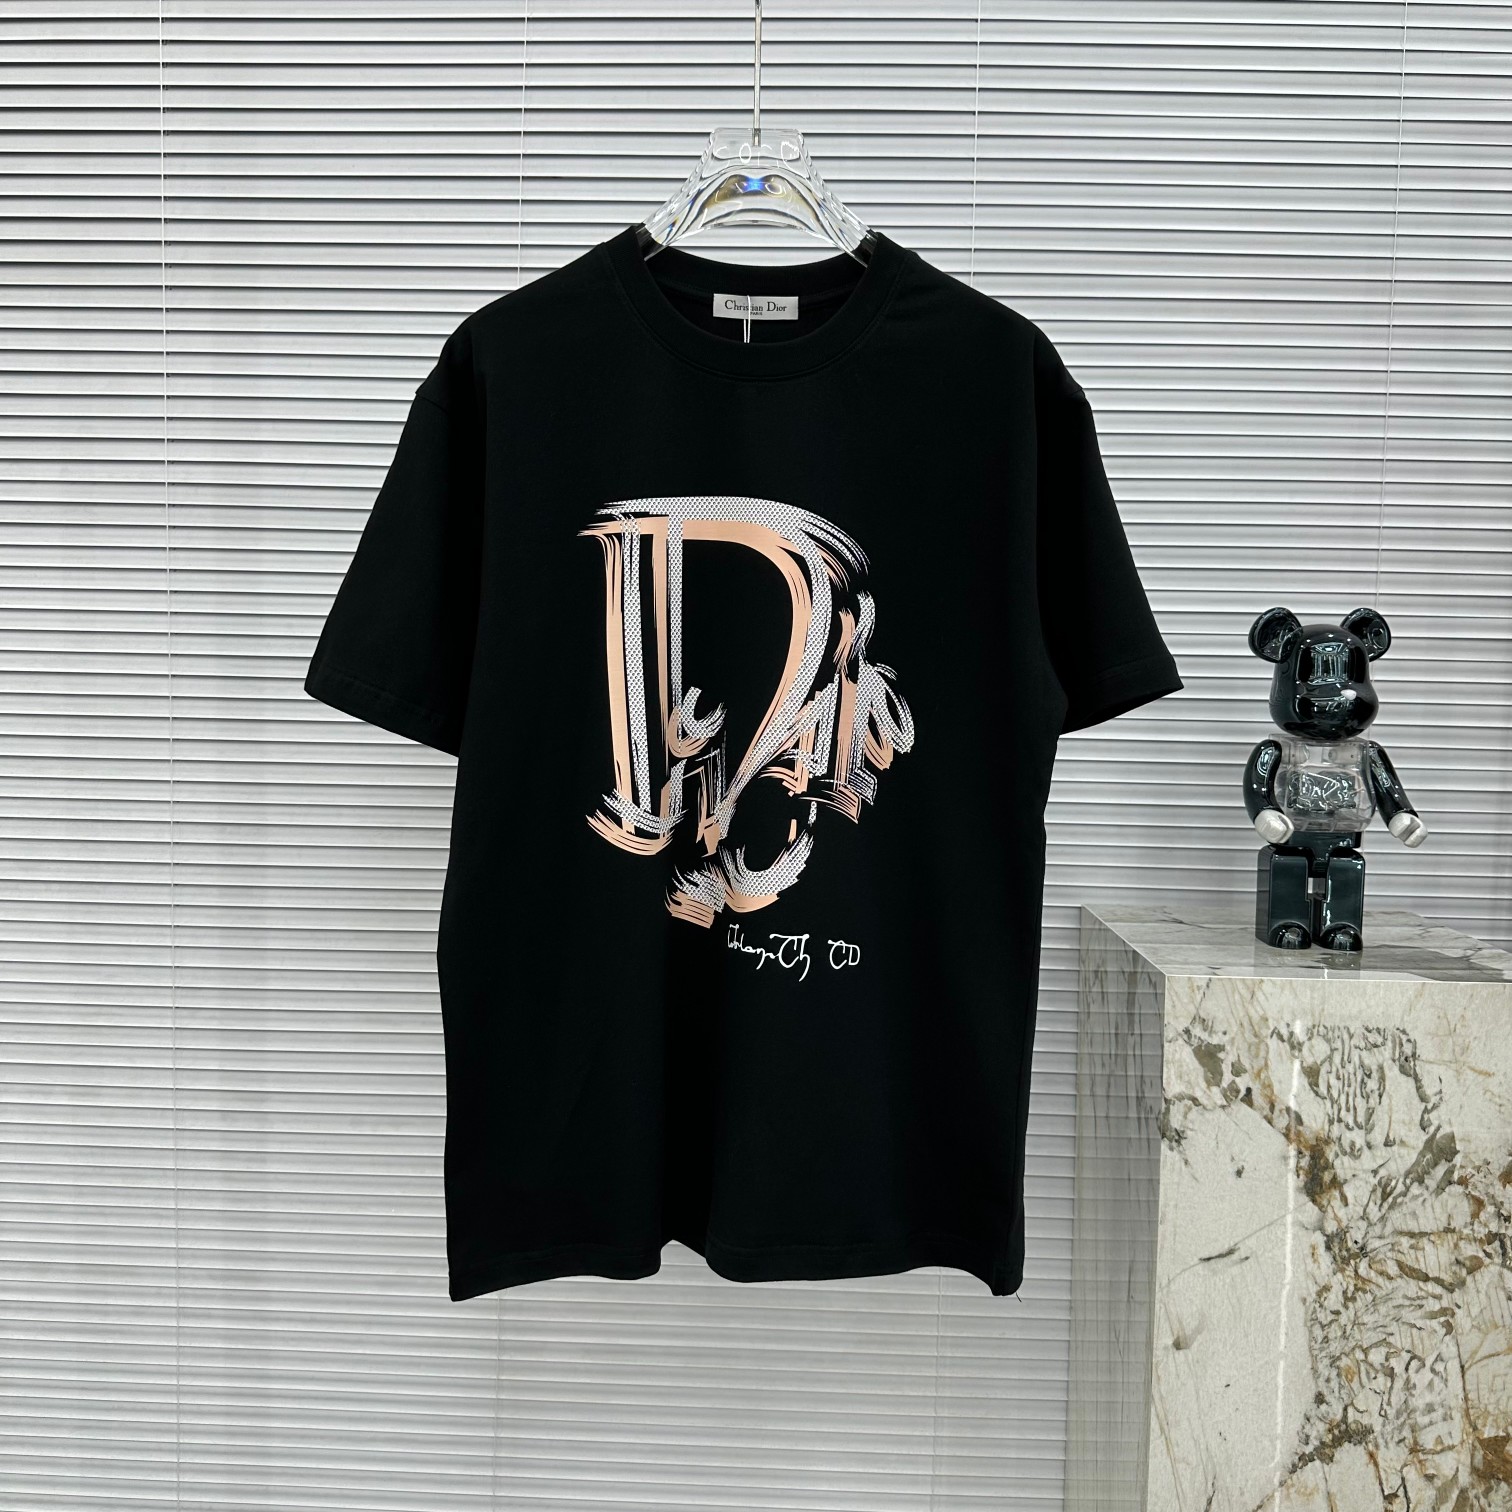 Dior Clothing T-Shirt Black White Printing Spring/Summer Collection Short Sleeve